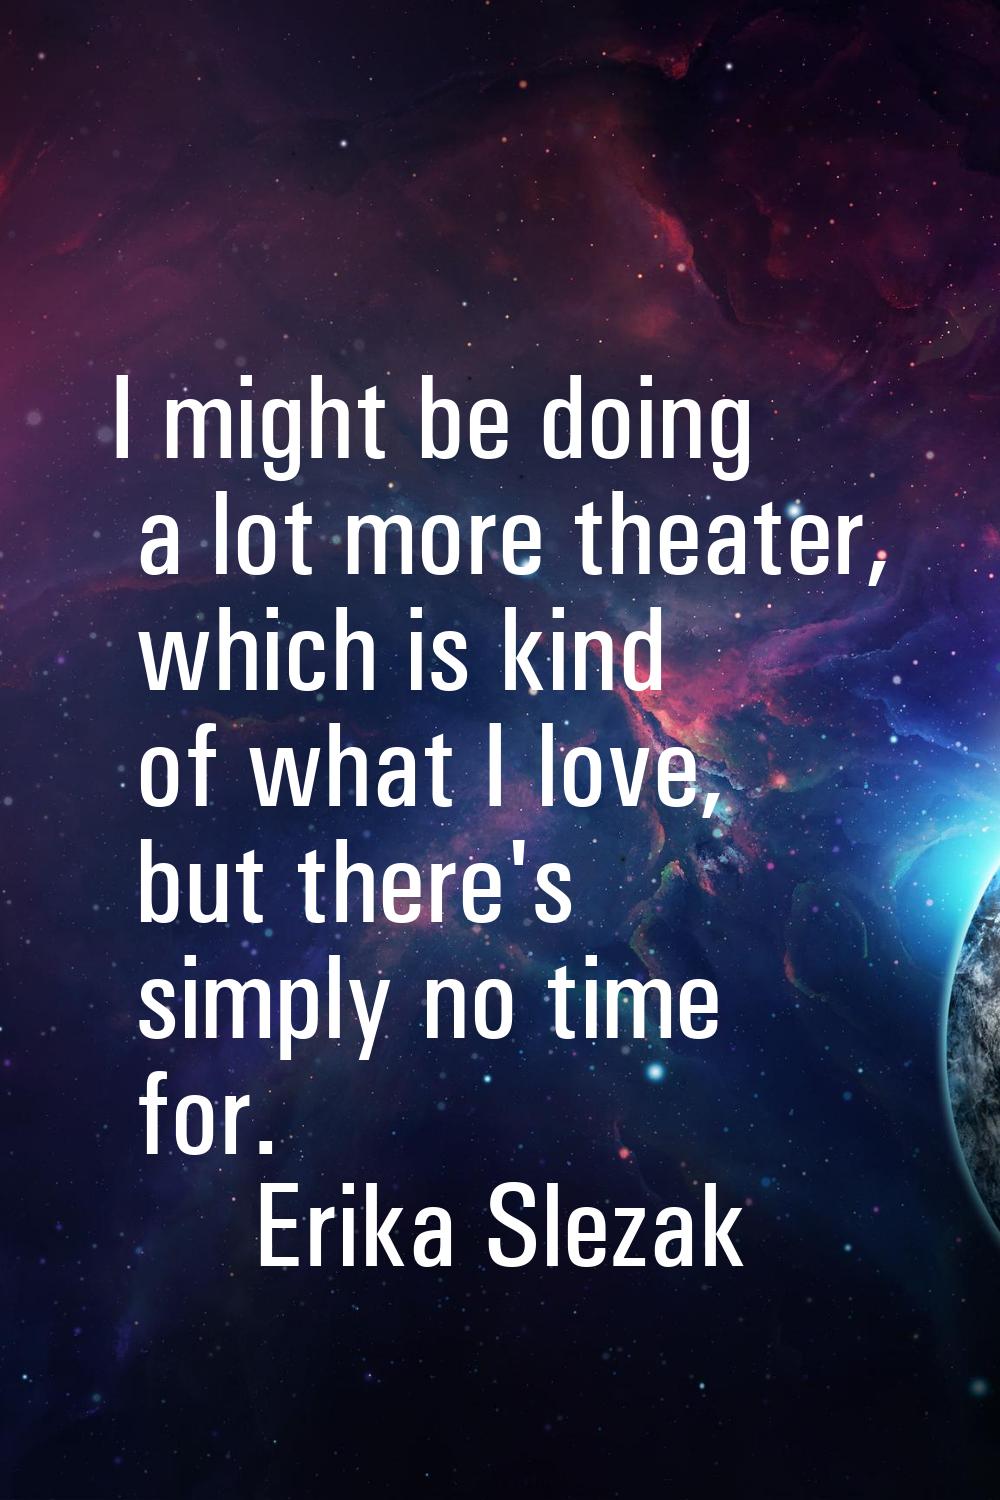 I might be doing a lot more theater, which is kind of what I love, but there's simply no time for.